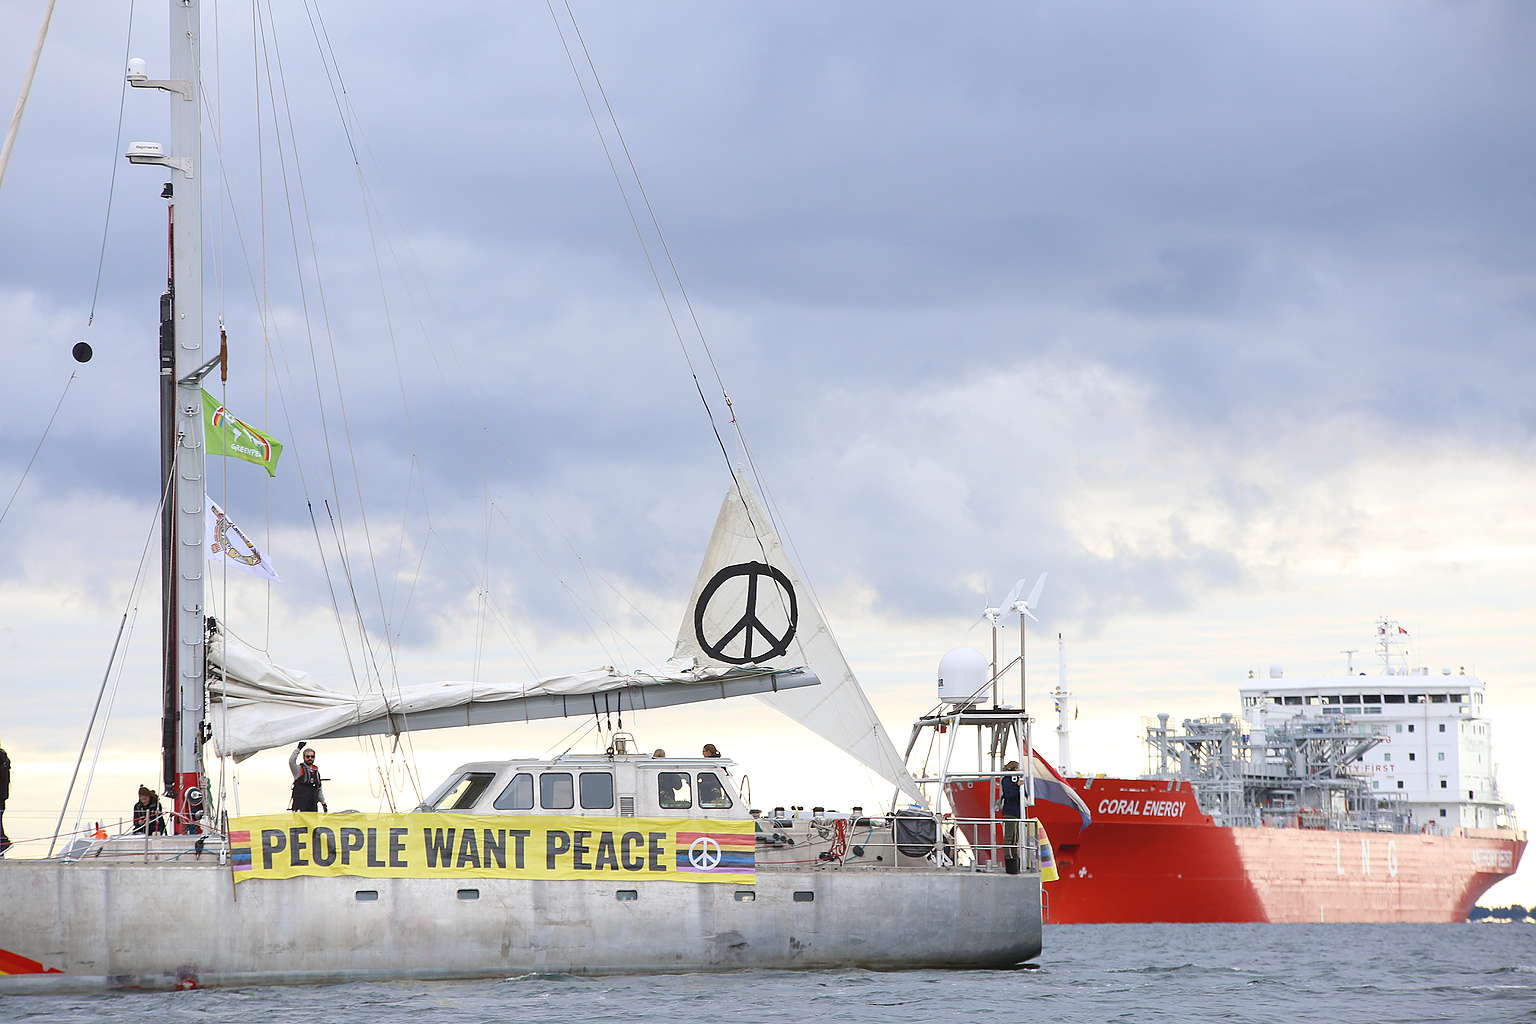 Activists stop gas tanker from being unloaded in Sweden